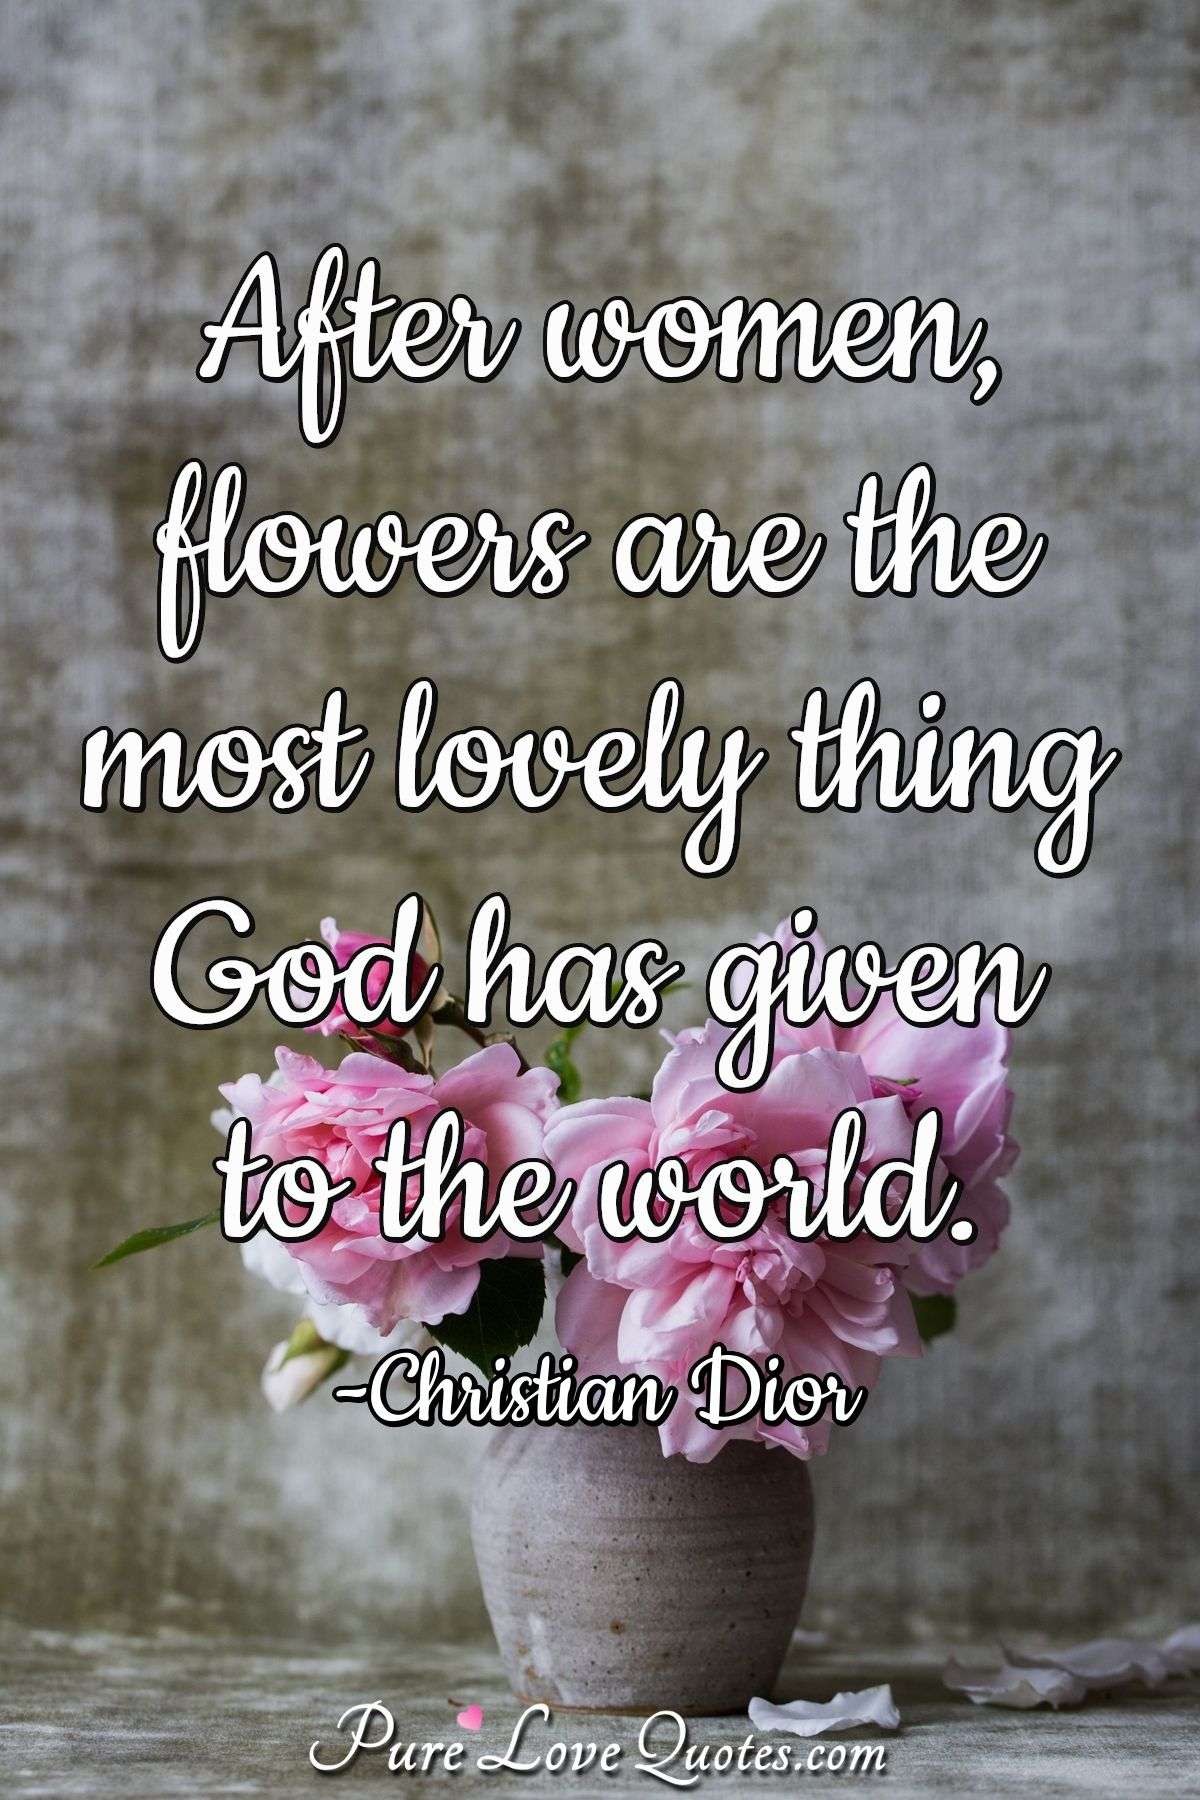 After women, flowers are the most lovely thing God has given to the world. - Christian Dior